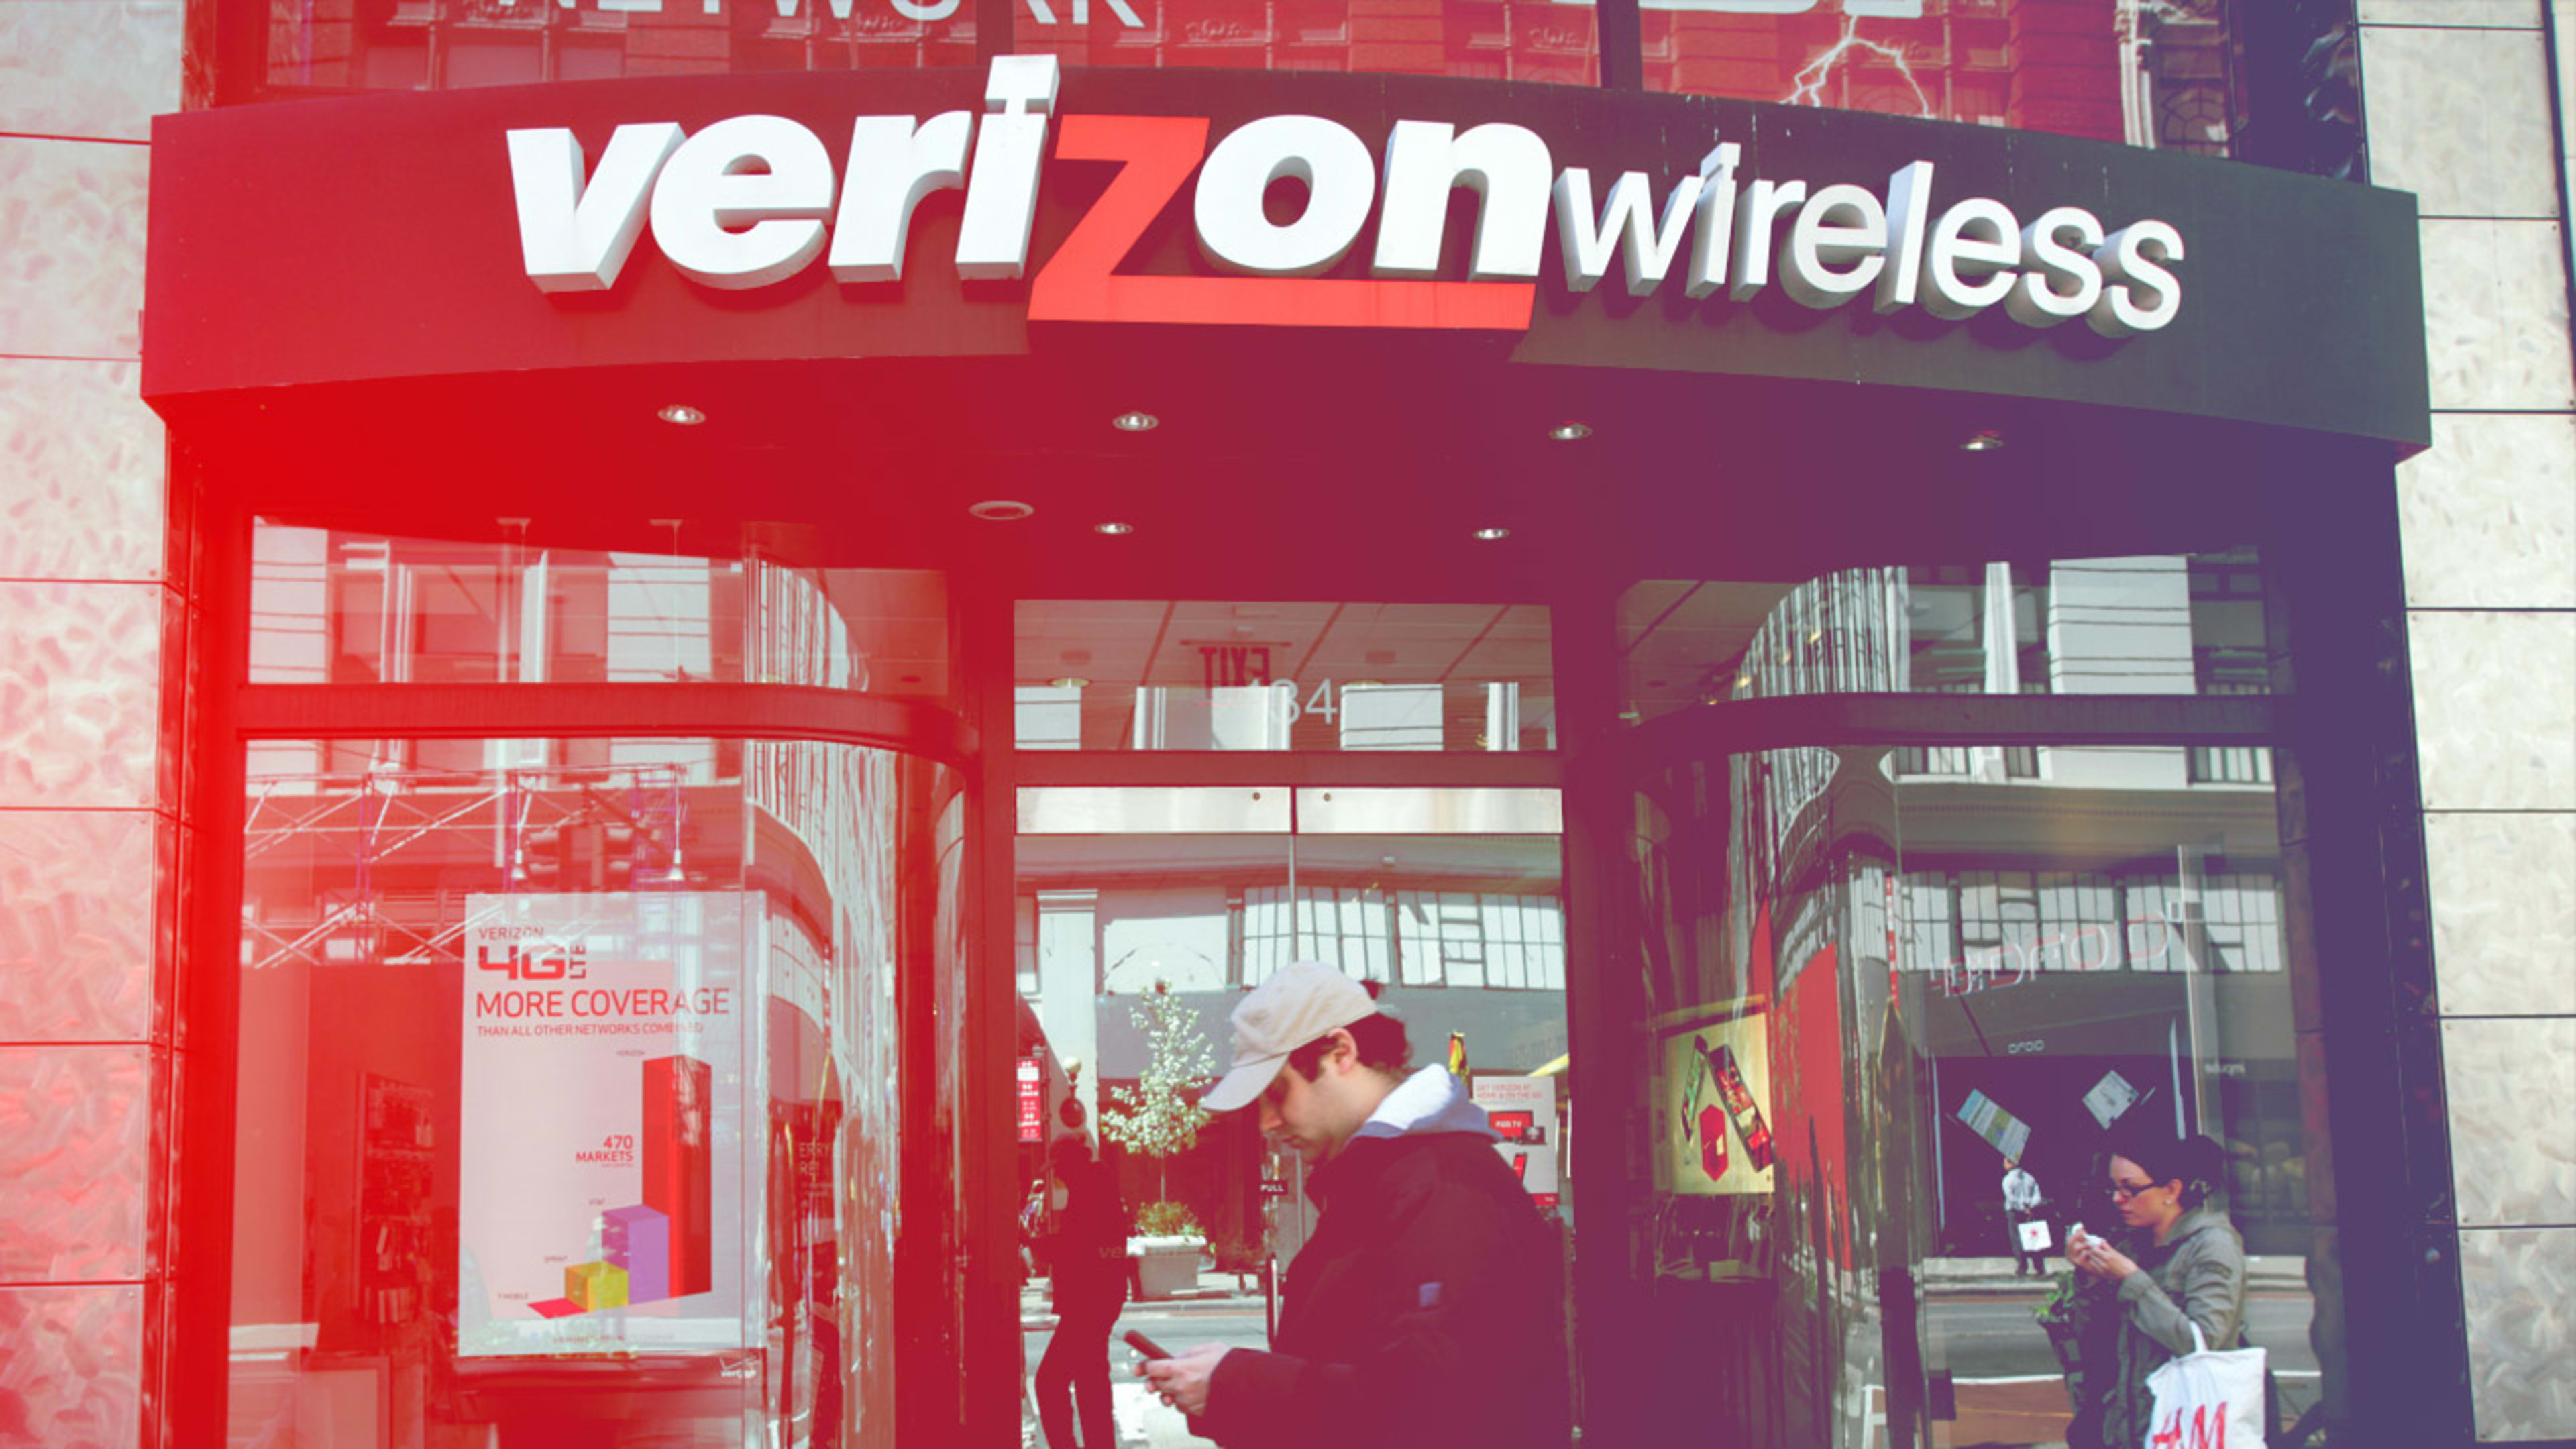 FCC Busts Verizon Wireless For Tracking Users Without Consent